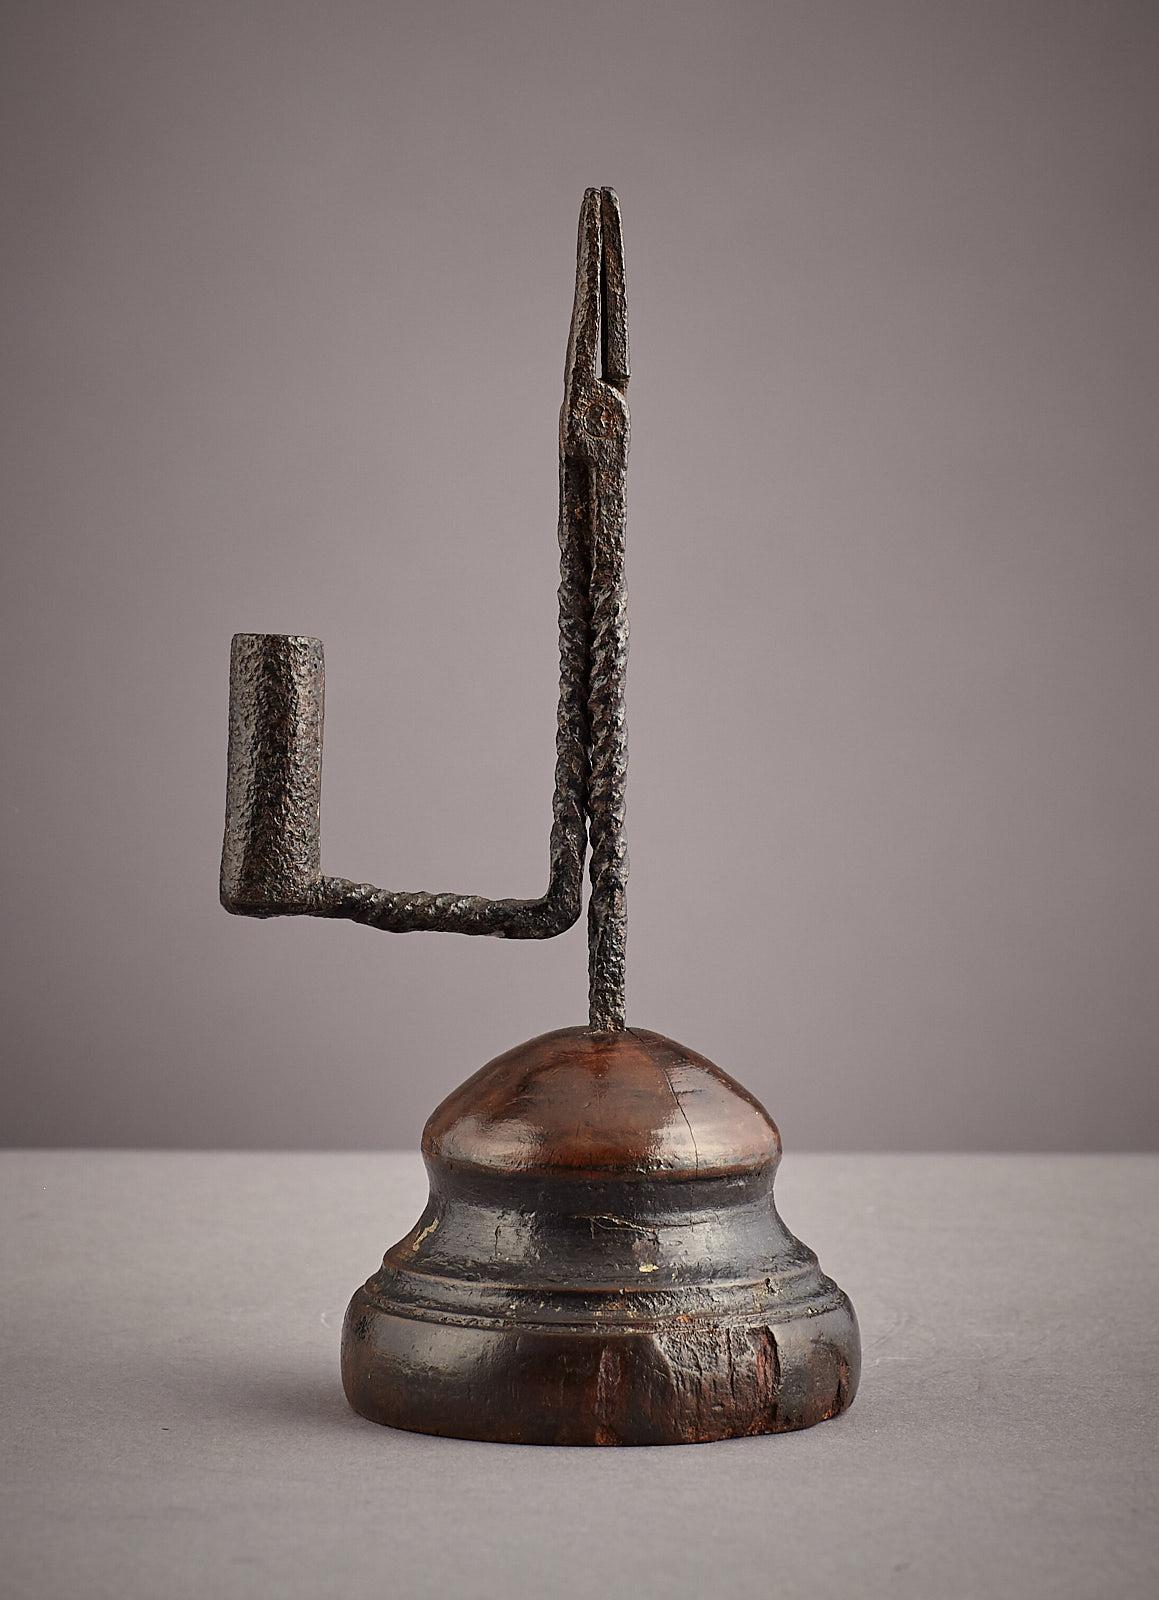 Early 19th century twist stem wrought iron and beech rush nip, English, circa 1800-1820.

The spiral twist stem with pincer action nip and counter weighted arm with candle socket, all set into the original turned Beech base, having original staple